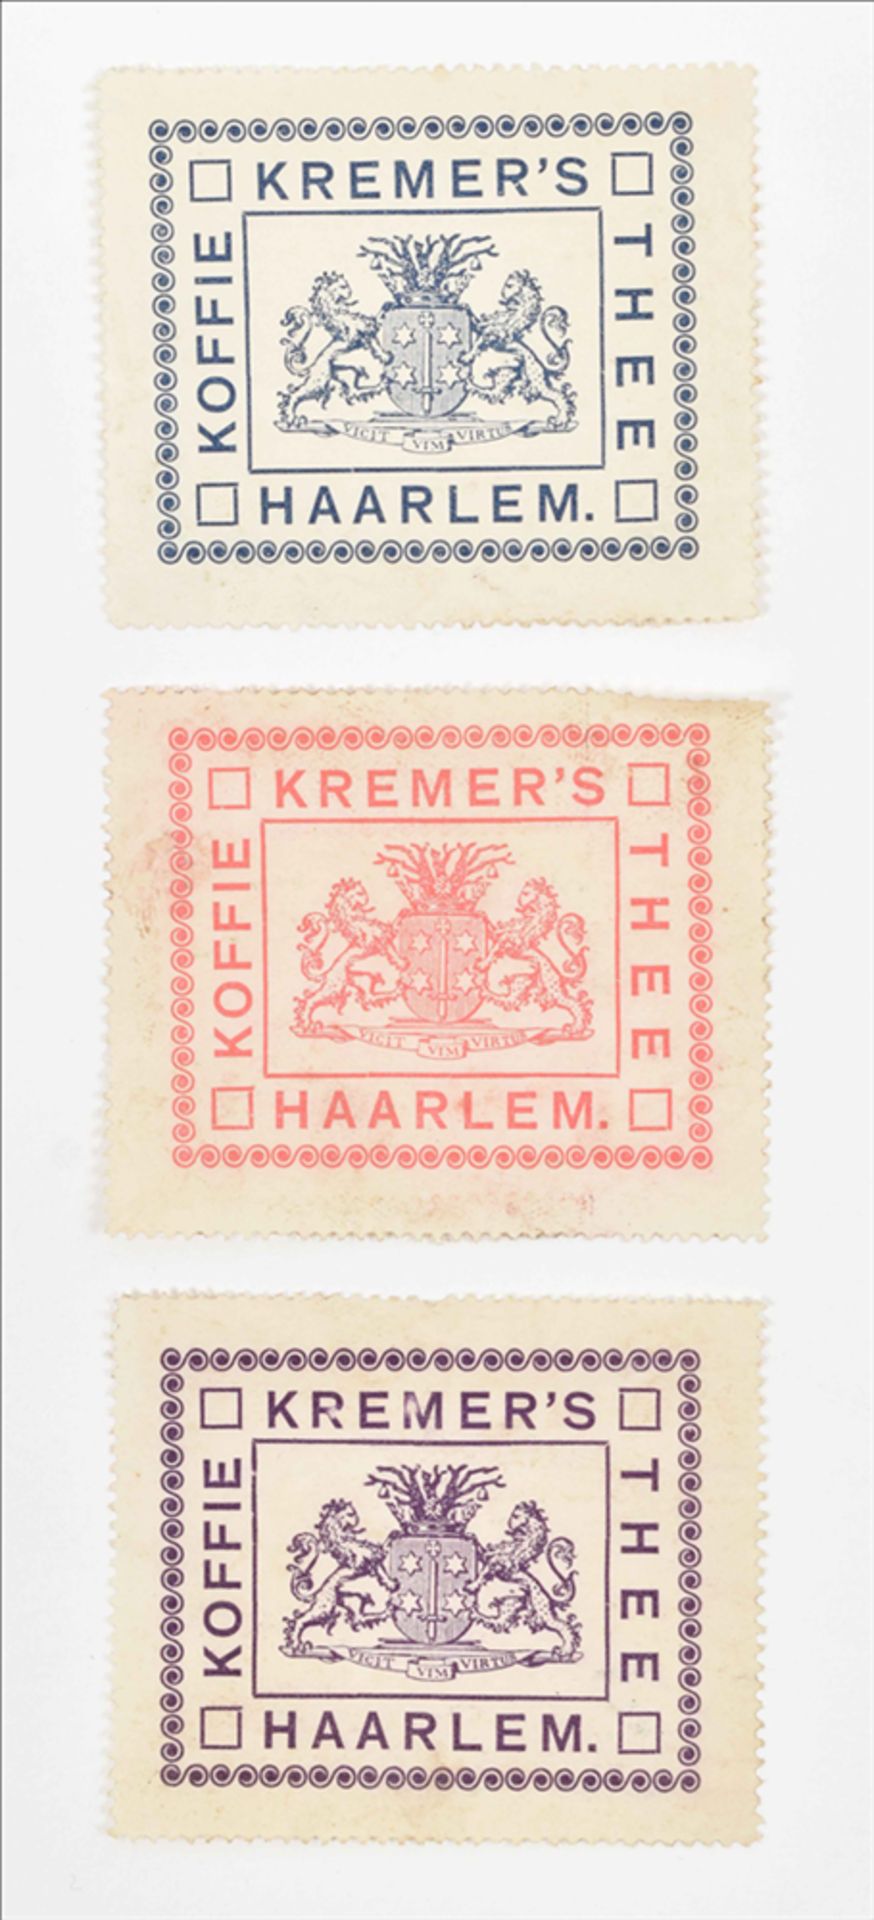 [Poster stamps] Dutch sluitzegels and labels - Image 7 of 10